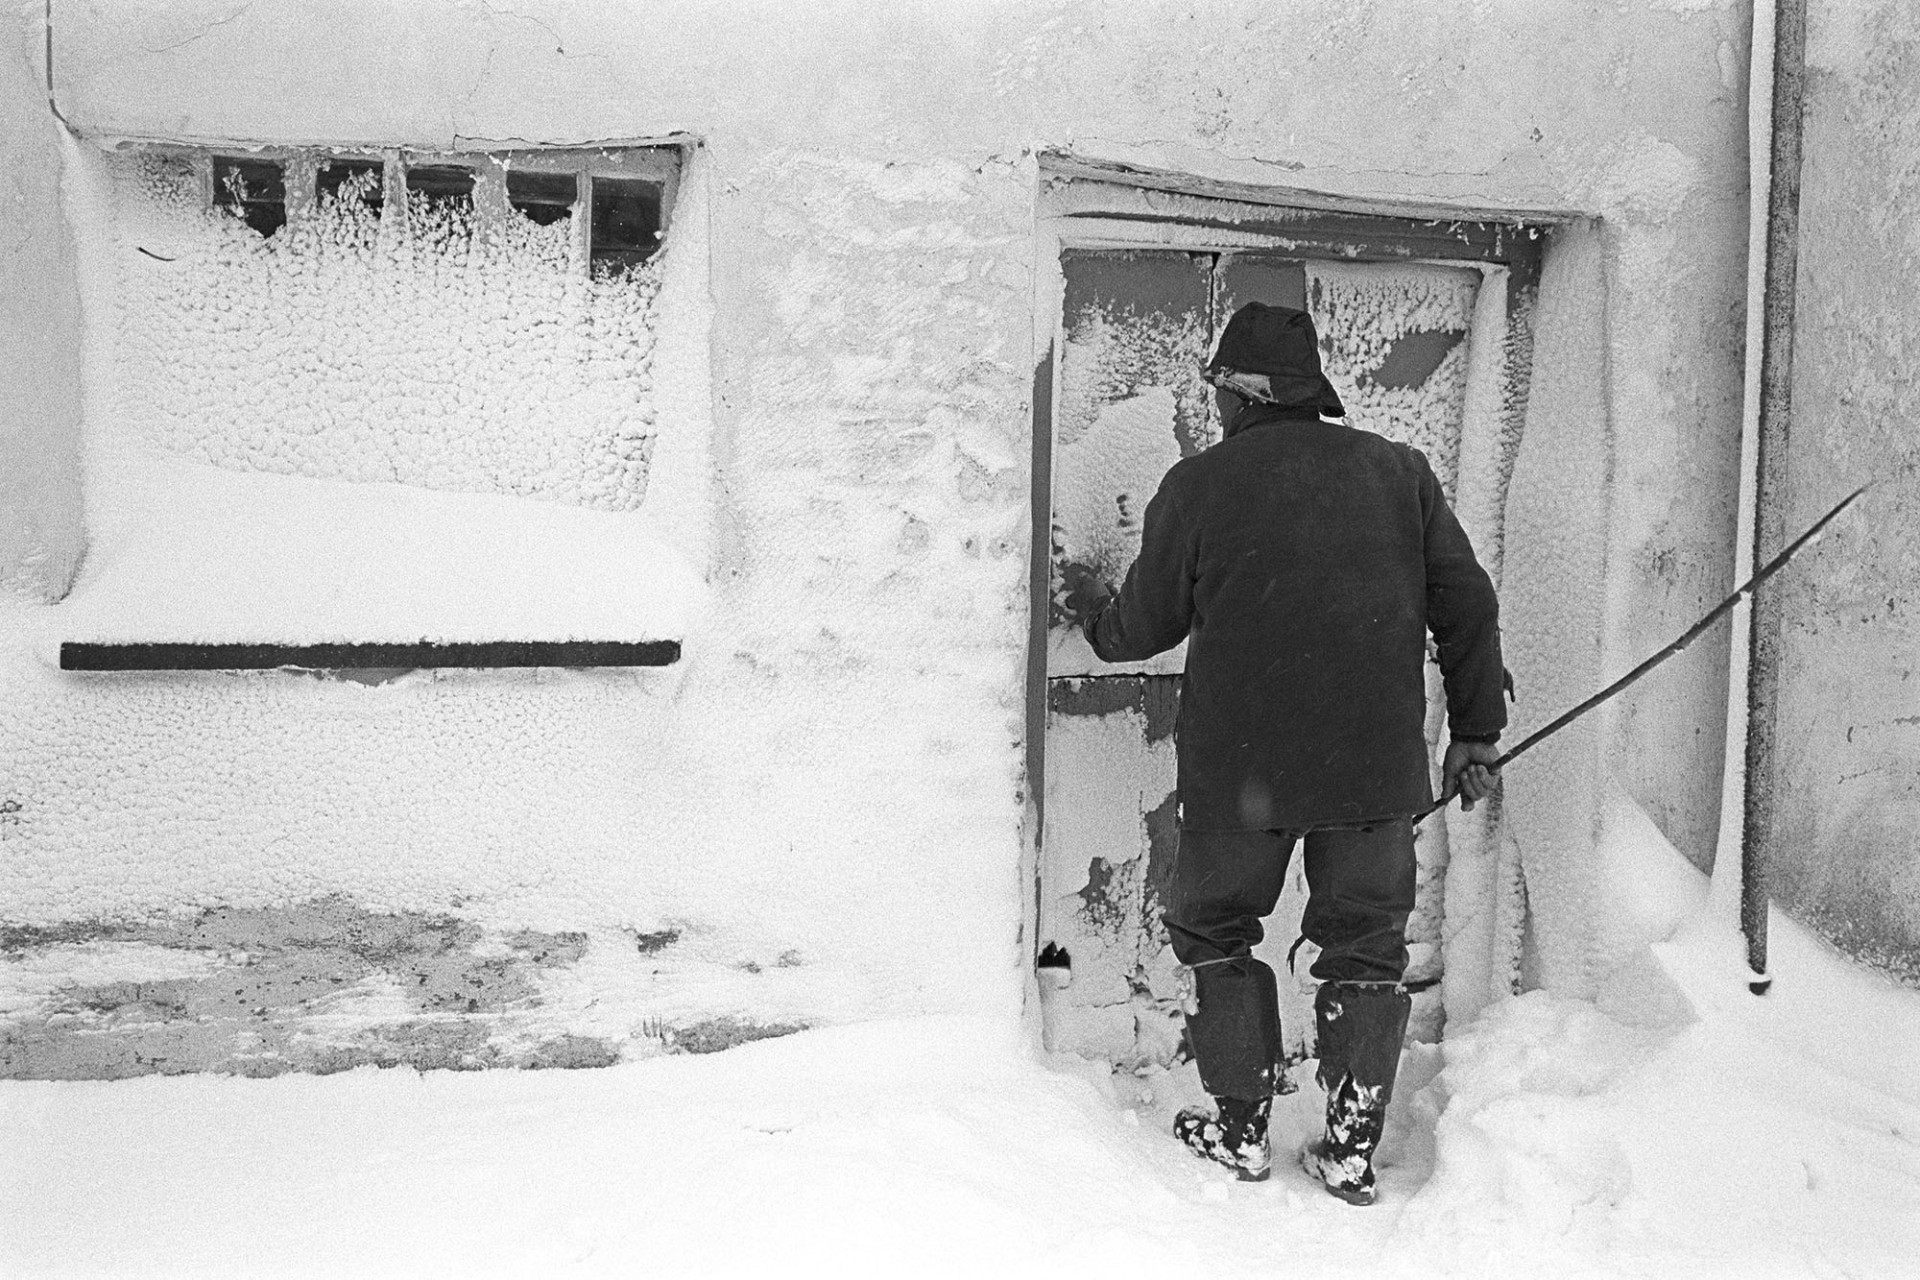 Snow, farmer entering farm door after blizzard. 
[Alf Pugsley opening the door of Lower Langham farmhouse in Dolton. He is wearing a sou'wester hat. The door and adjacent window are covered in snow from the blizzard.]